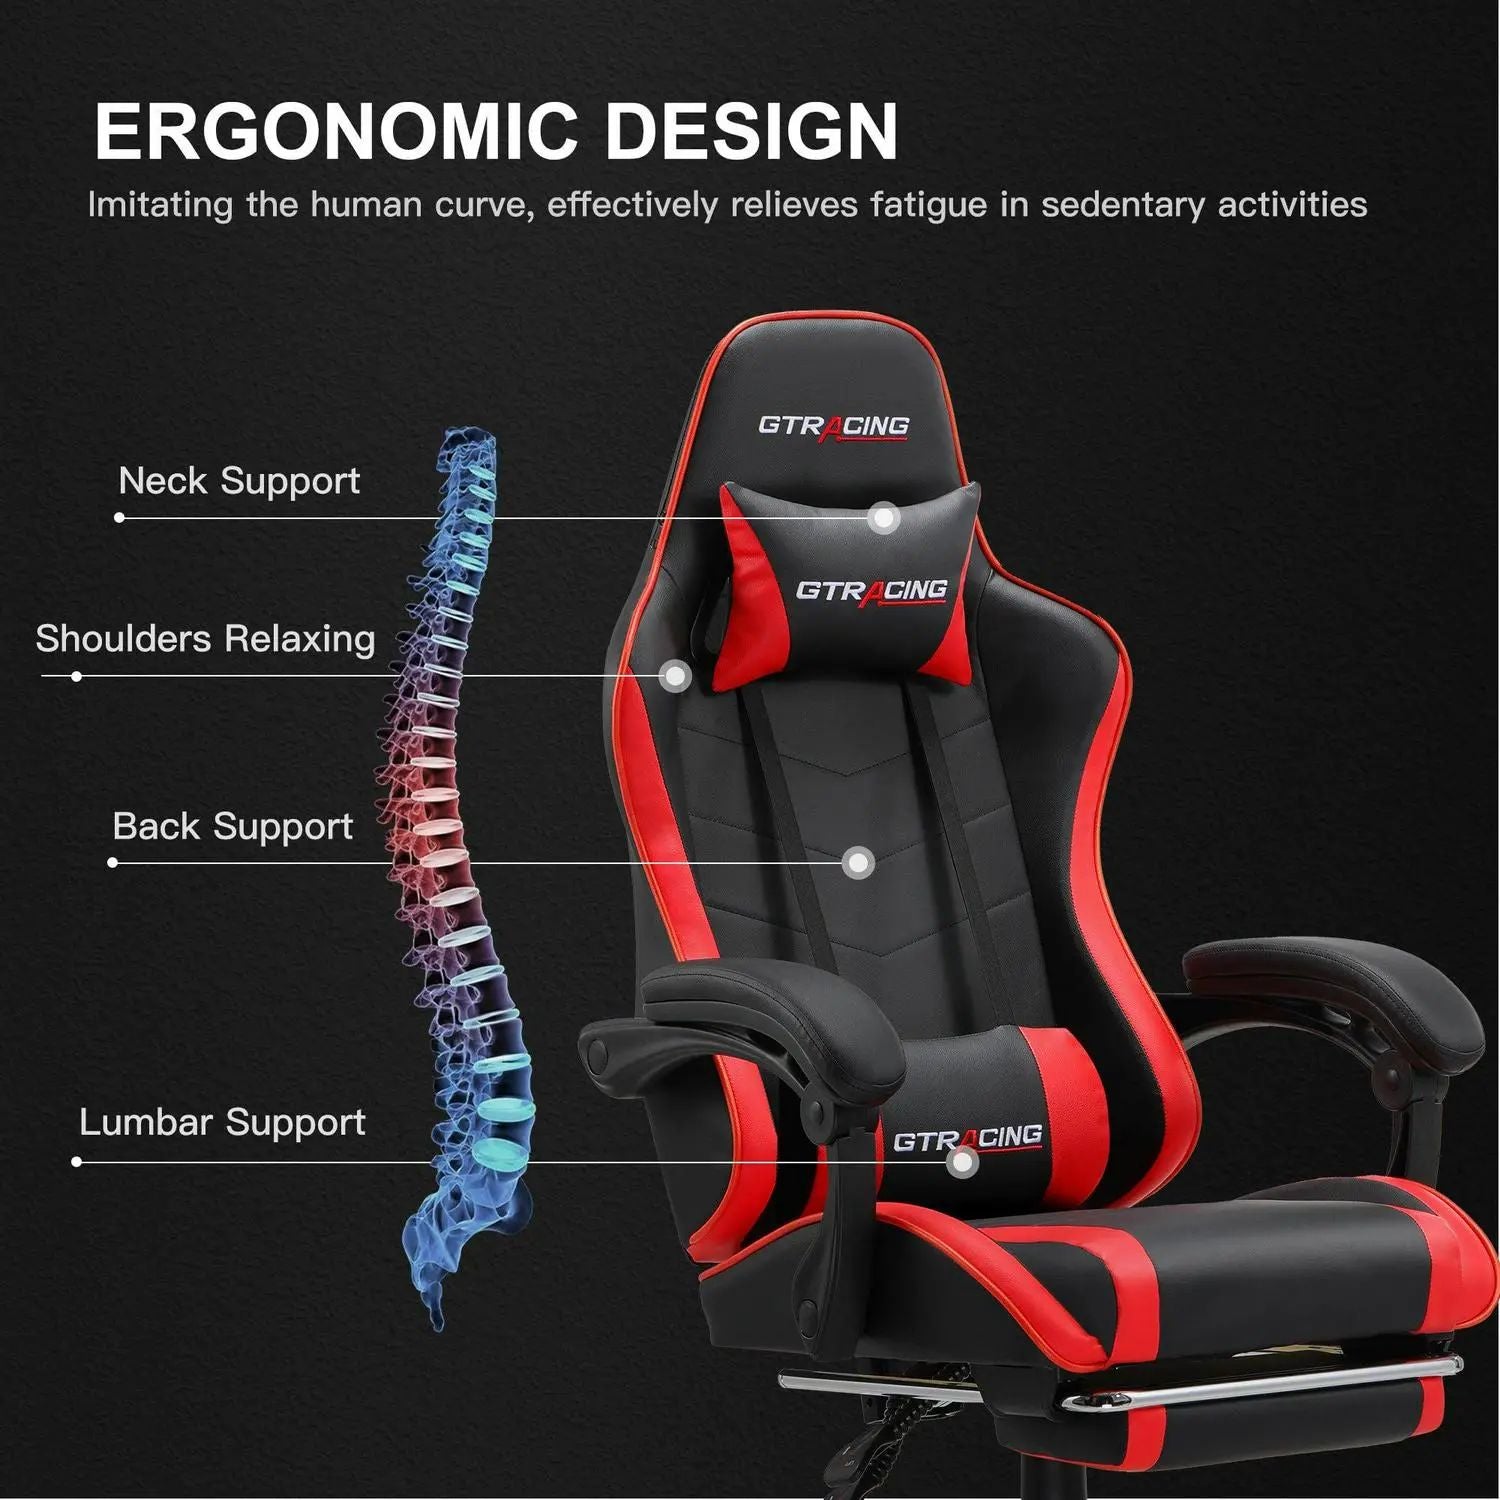 GTRACING GTWD-200 Gaming Chair with Footrest, Adjustable Height, and Reclining, Red - GTRACING